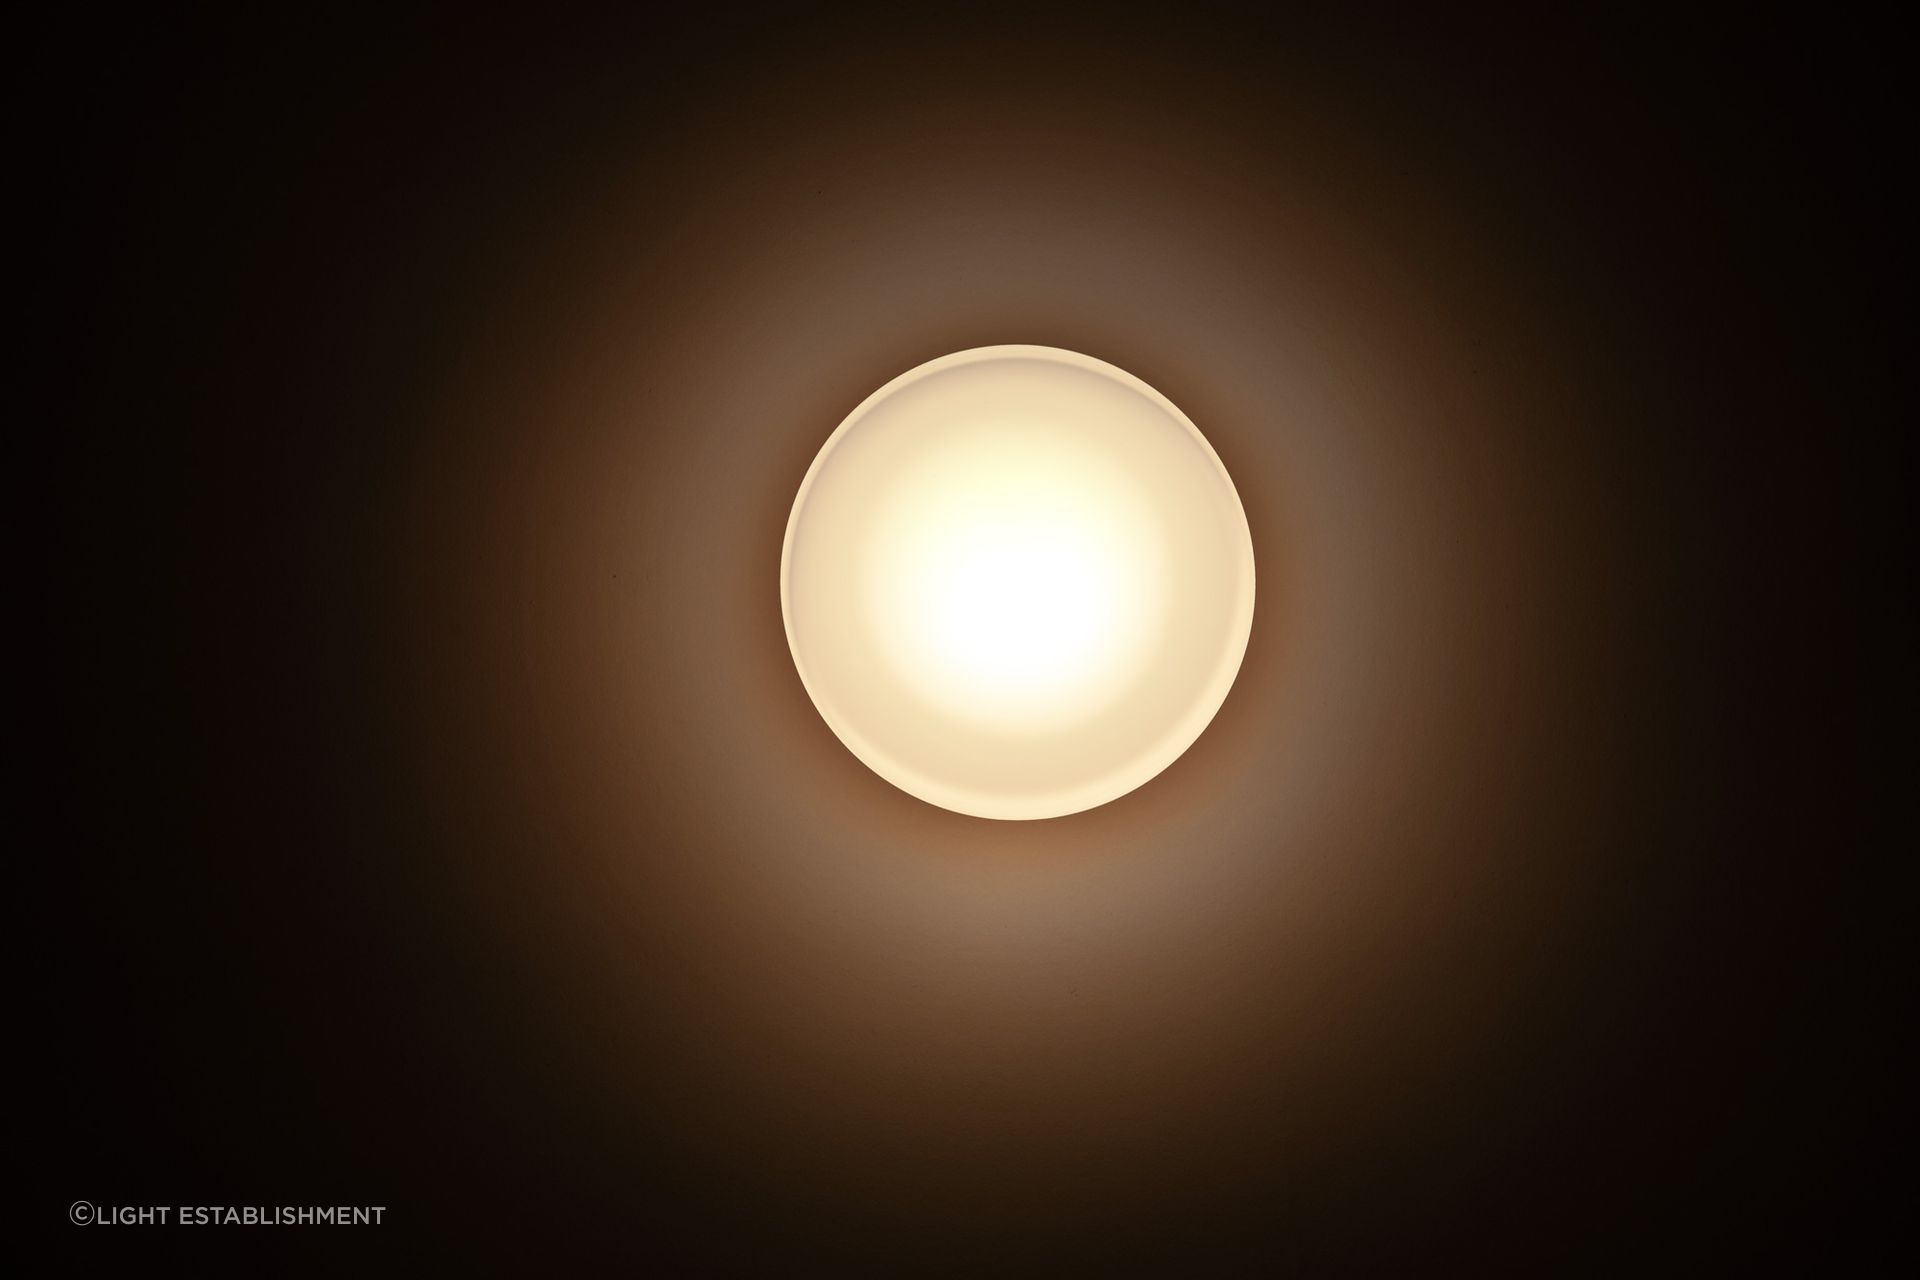 Flat White W1 is your everyday light, suitable for wall applications and bathroom mirrors.